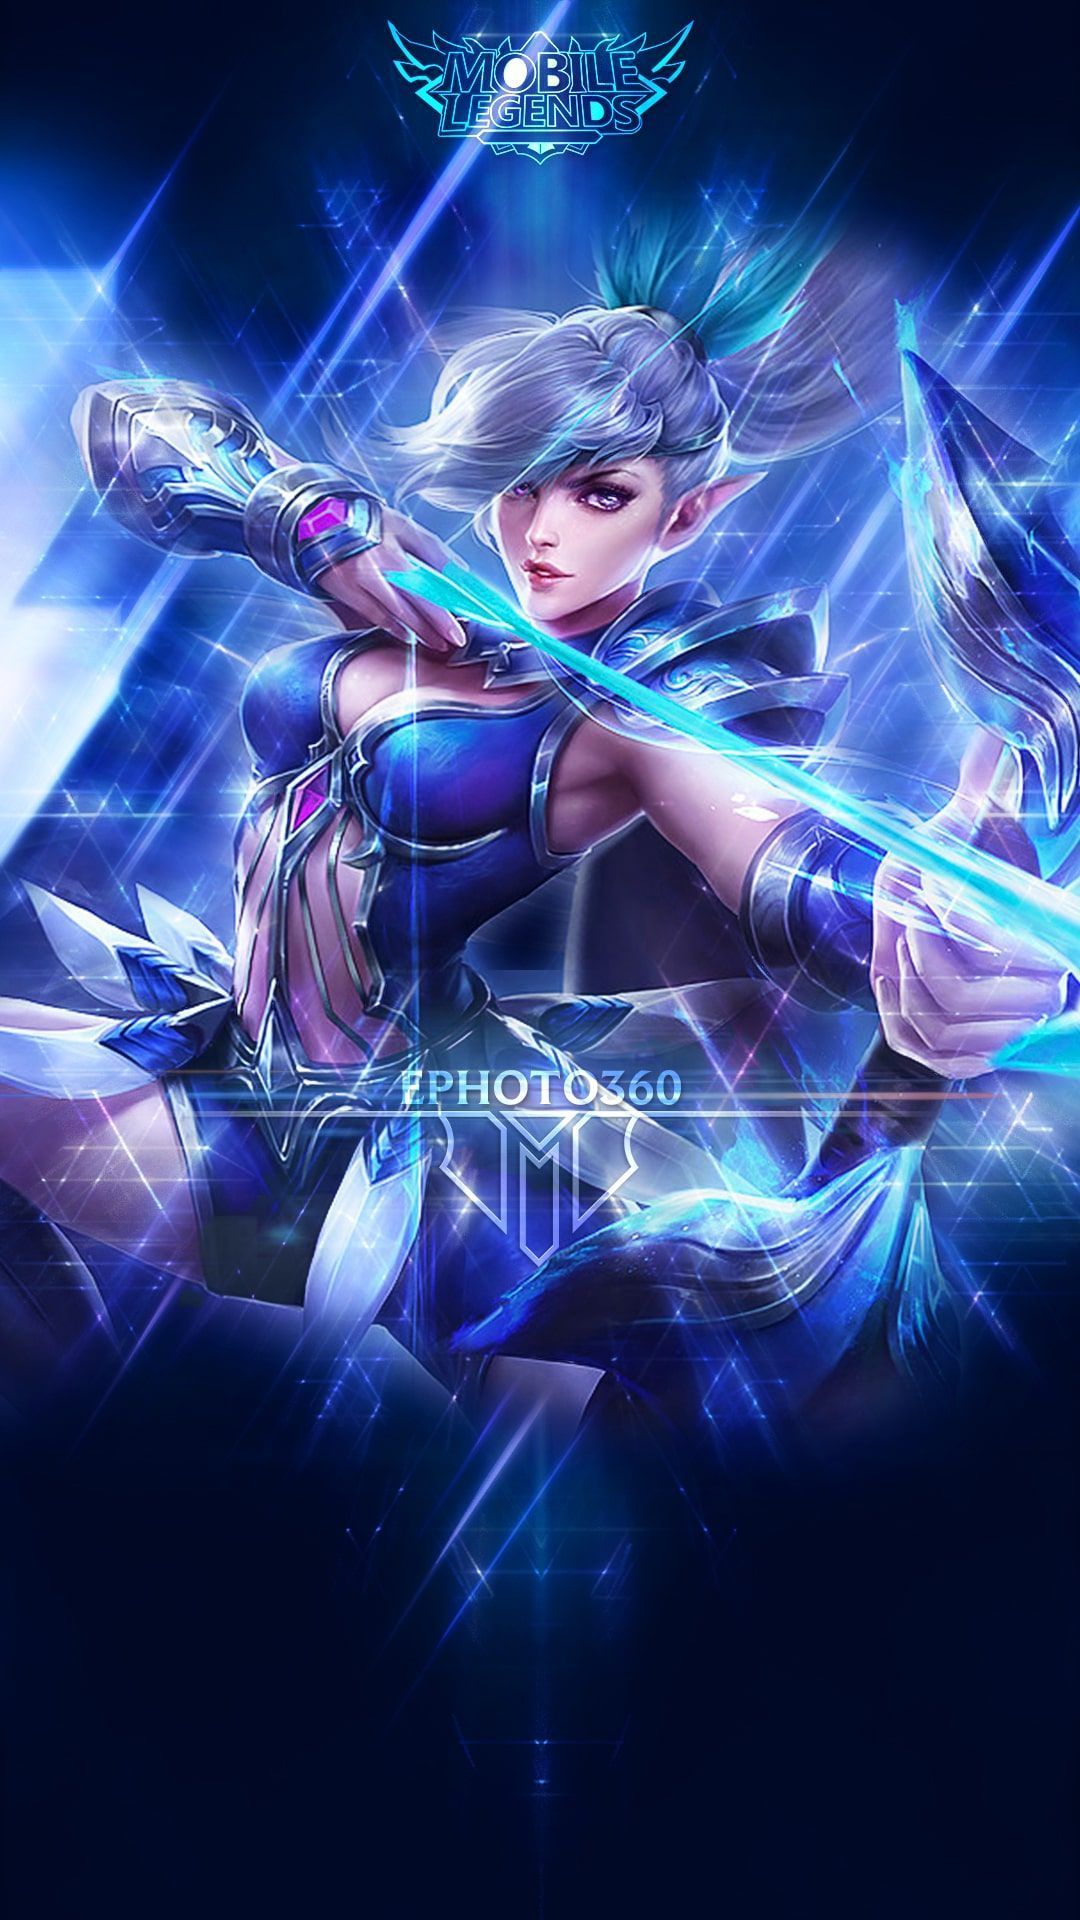 What Hd Wallpaper Mobile Legends For Pc